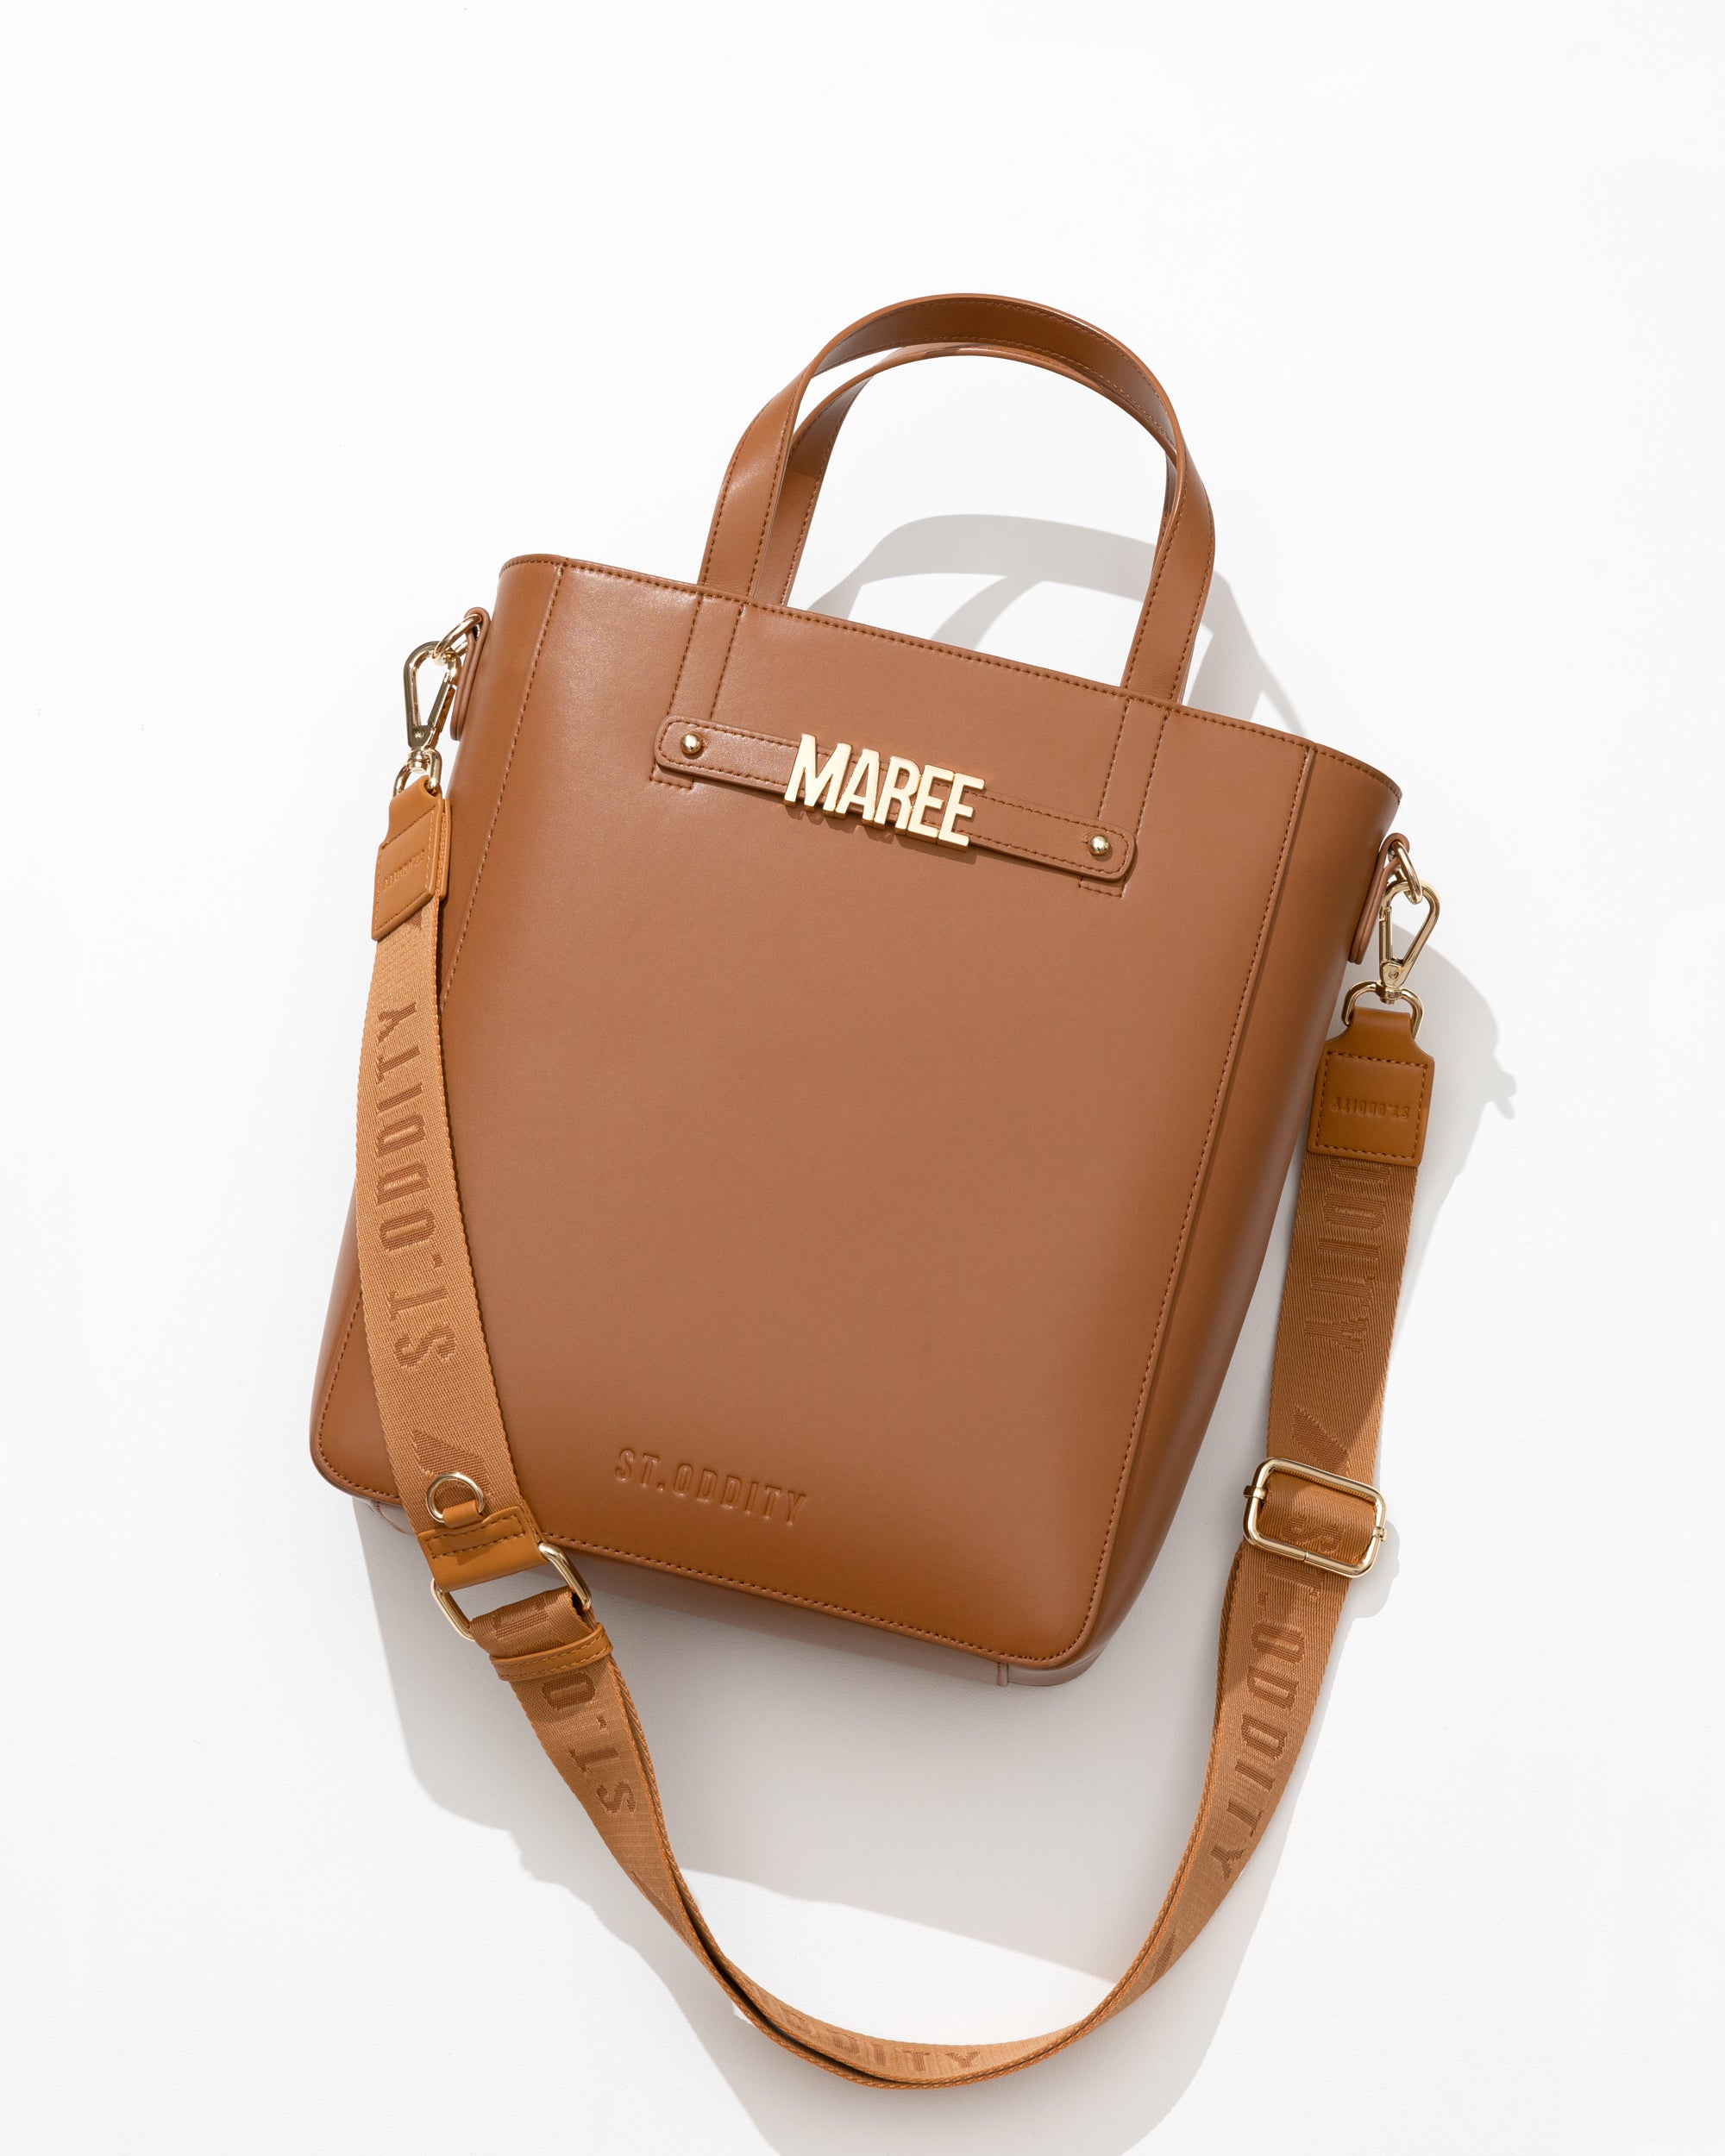 Tote in Tan with Personalised Hardware